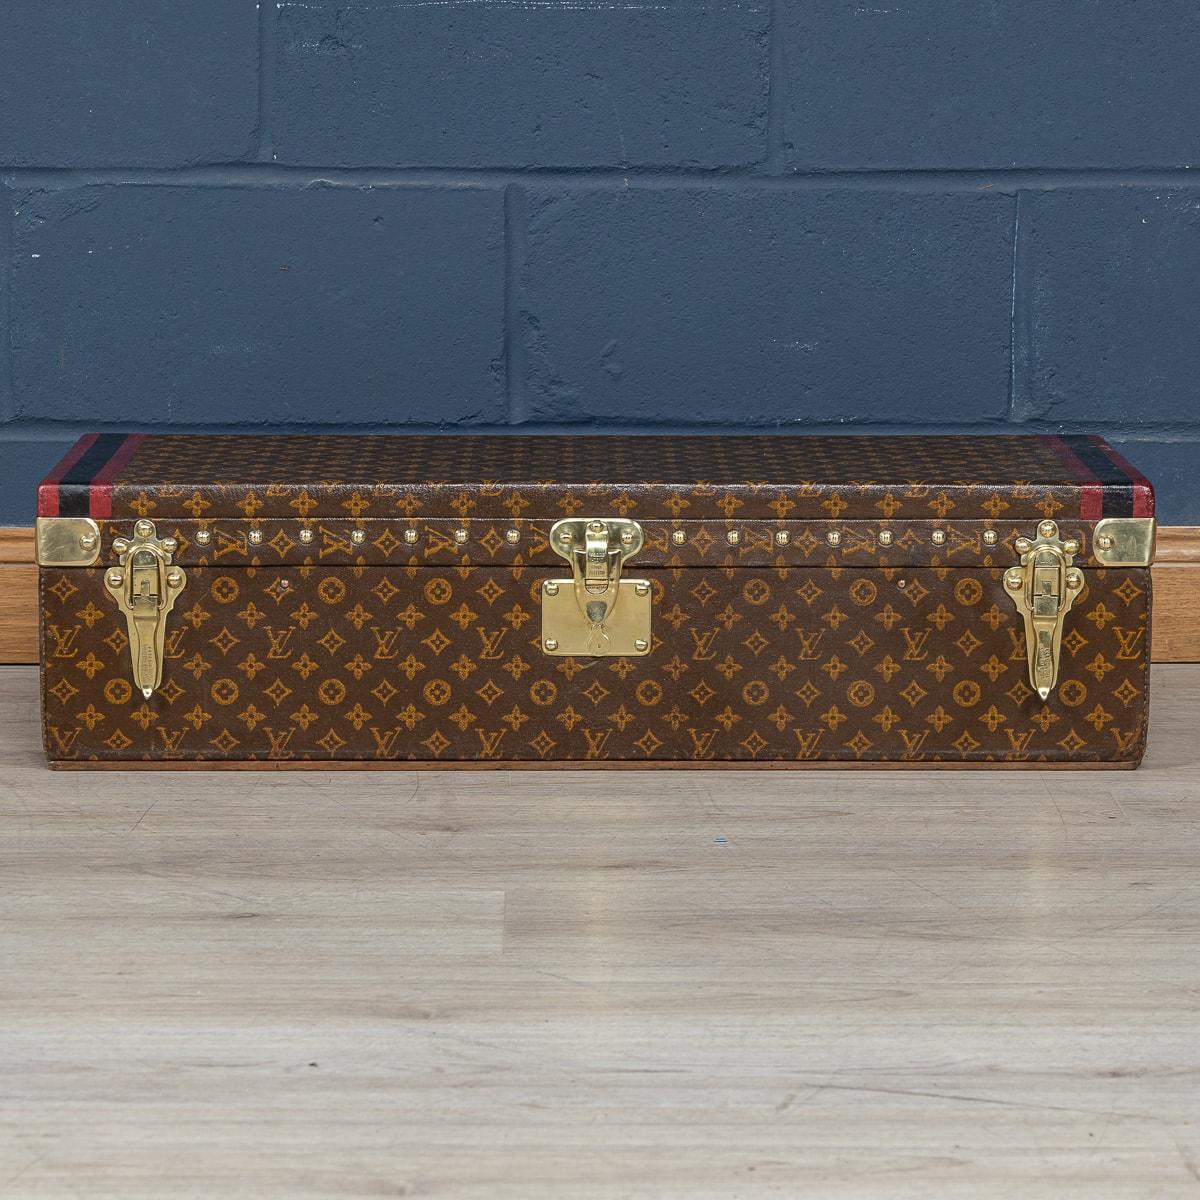 A very rare Louis Vuitton car trunk covered in the world famous monogram canvas. Car trunks were usually bespoke made for the owner’s car and would ordinarily be positioned inside the boot of the vehicle or strapped to the back of the vehicle. As